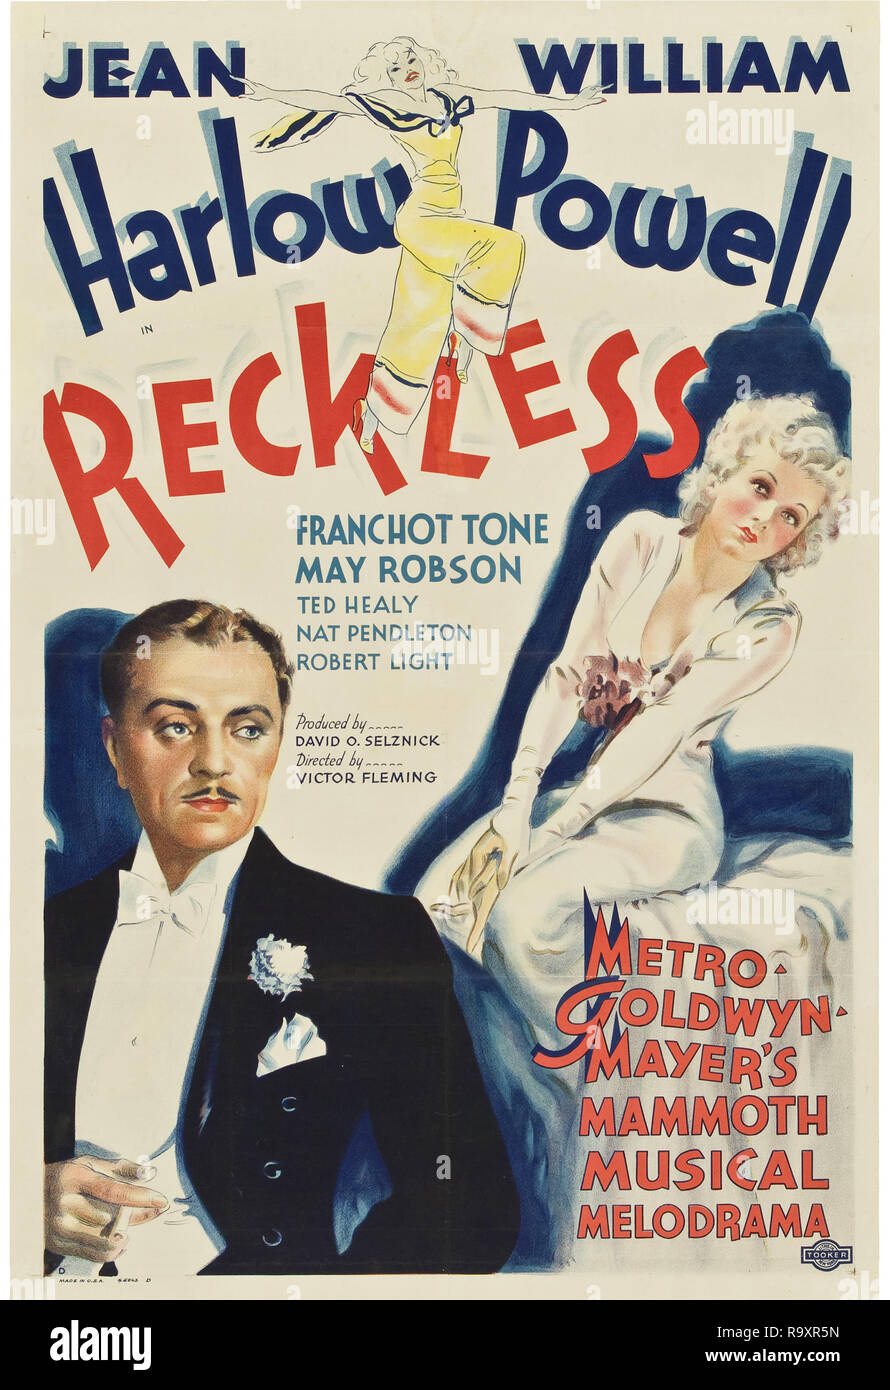 Reckless (MGM, 1935) Poster  Jean Harlow, William Powell  File Reference # 33635 958THA Stock Photo